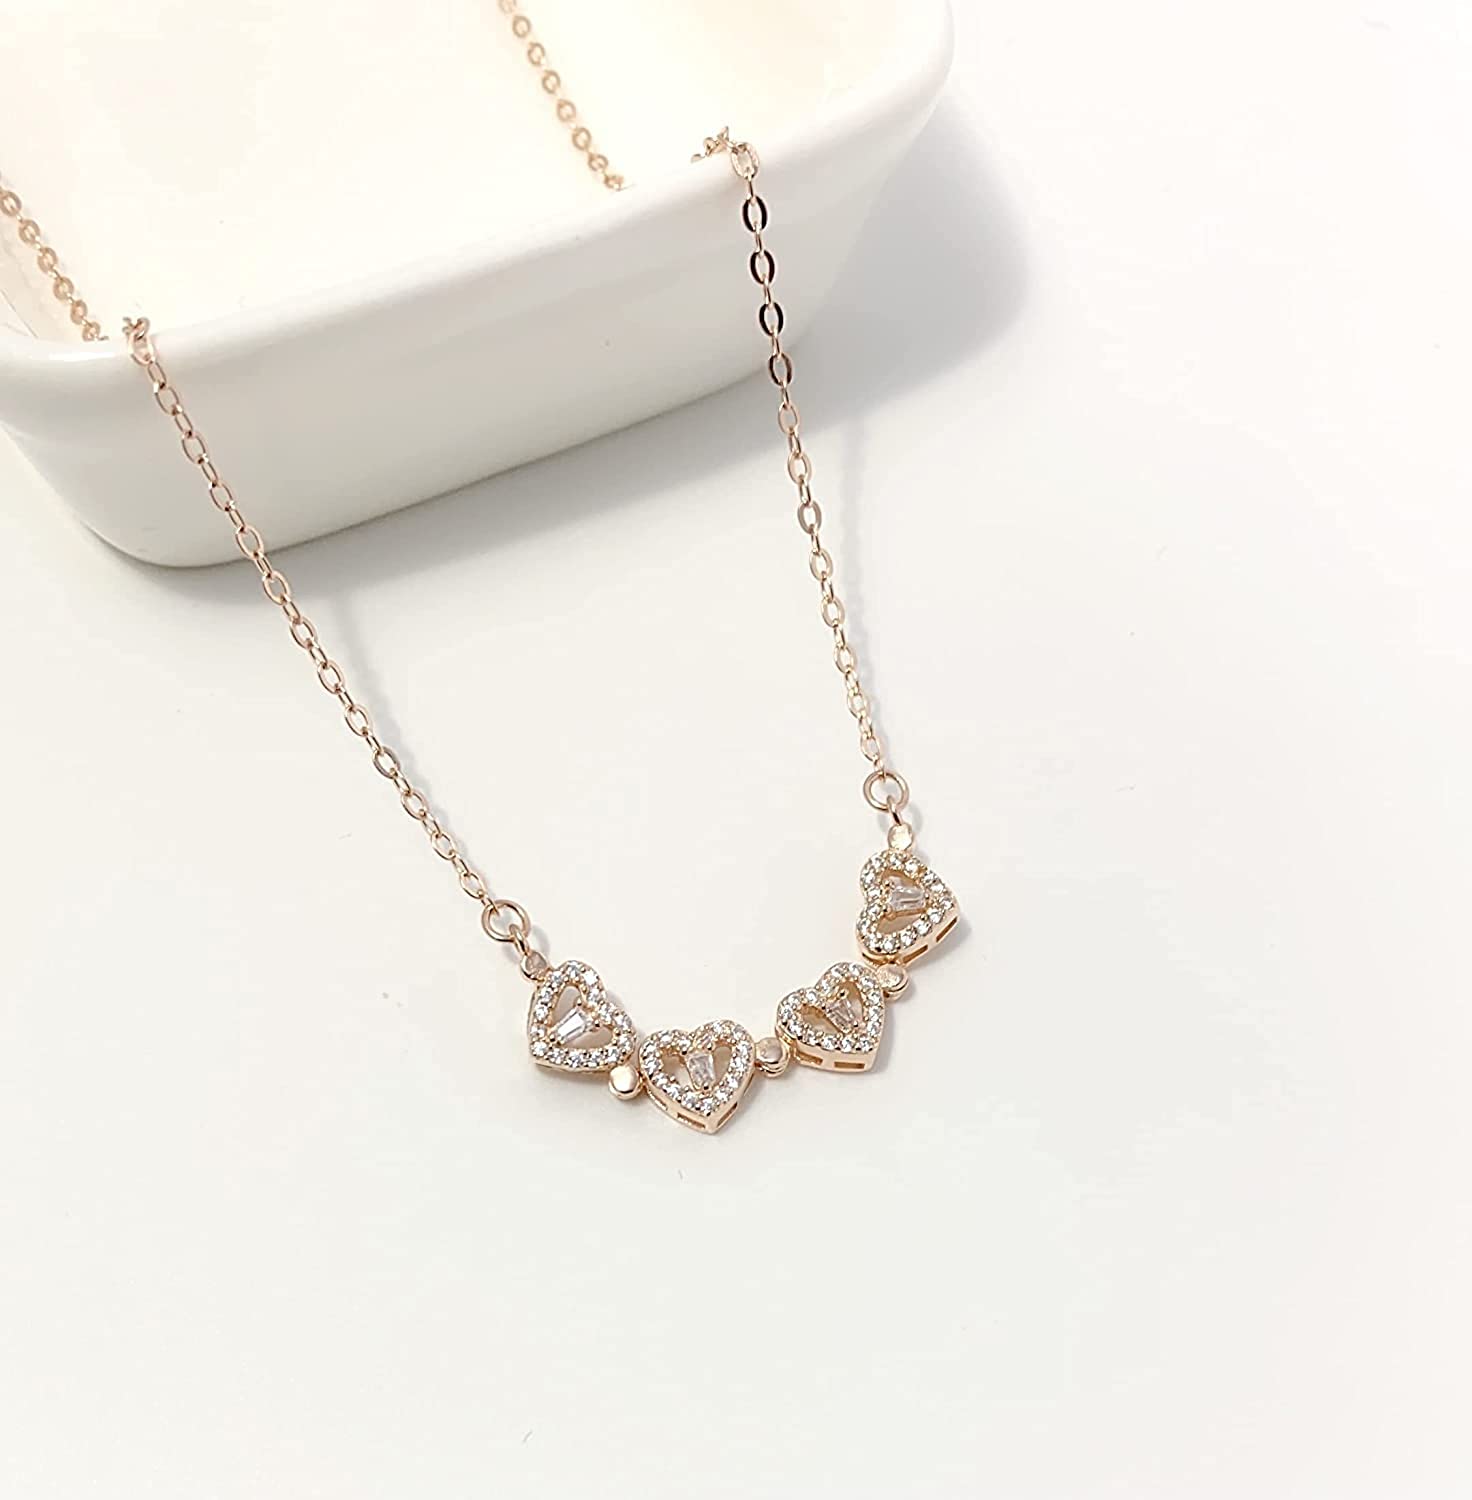 fcity.in - Multi Wearing Heart Necklace 4 Heart Magnetic Rose Gold Necklace